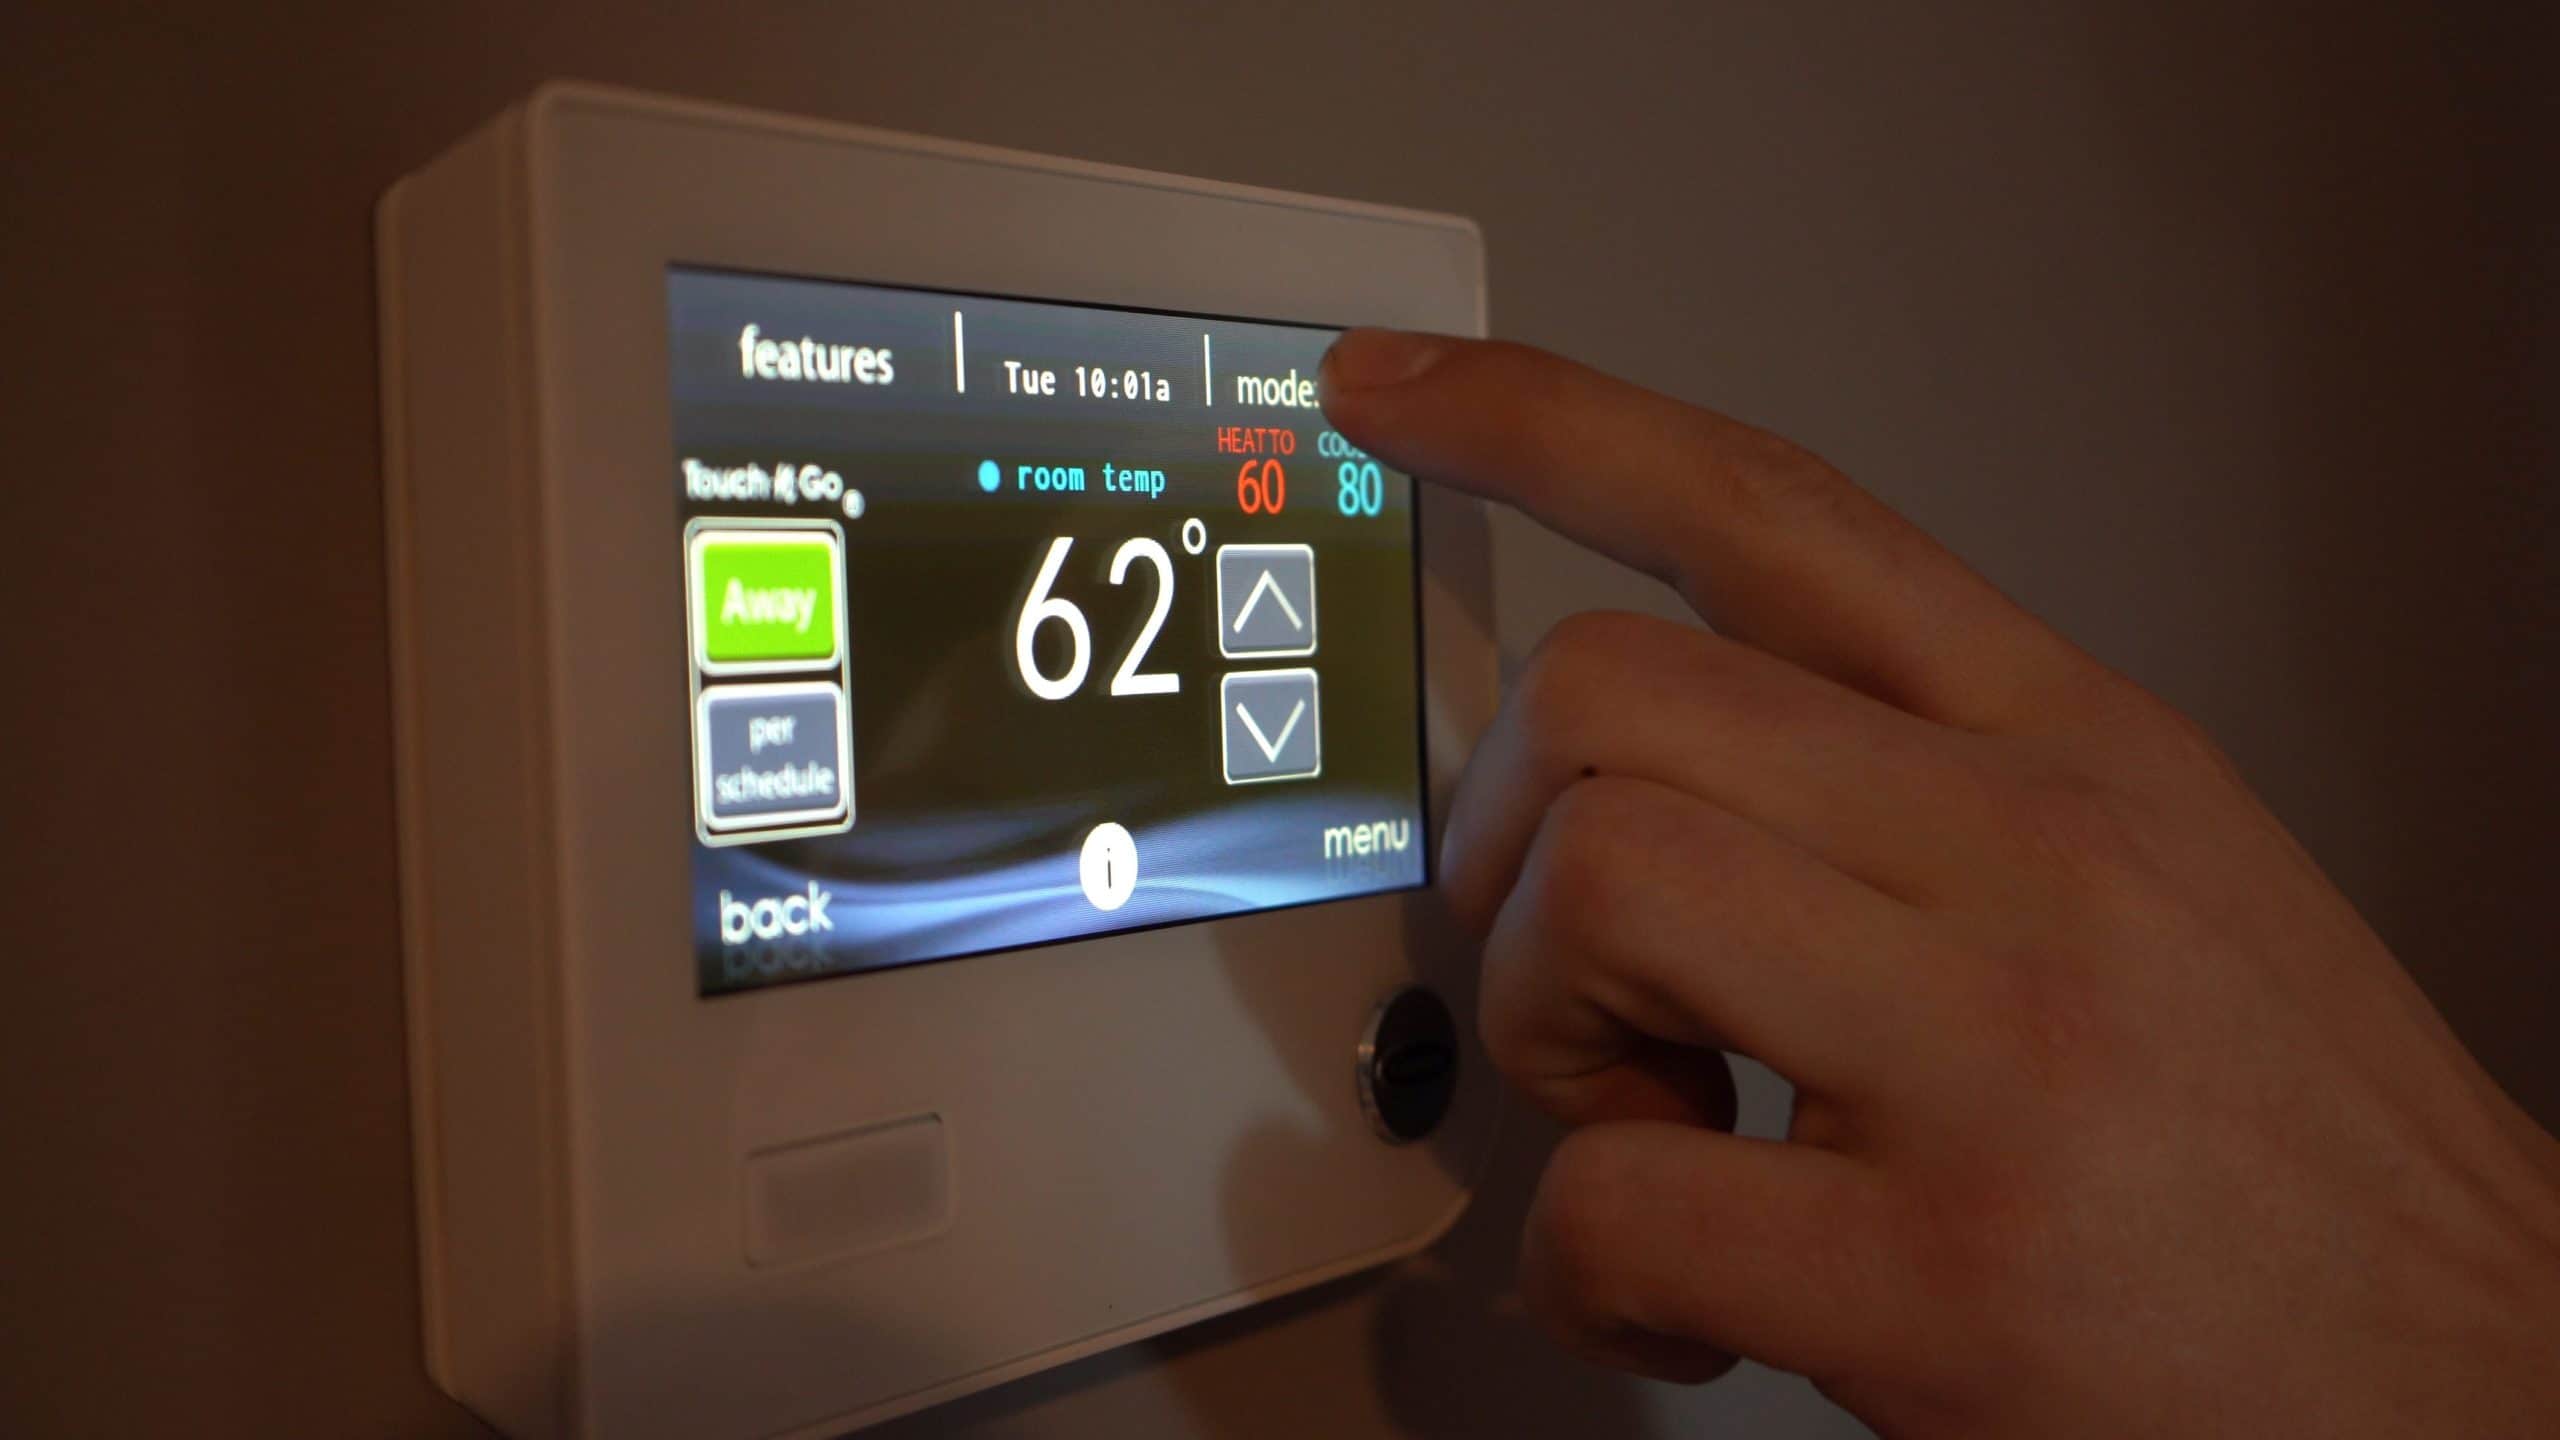 4 Reasons to Install a Programmable Thermostat